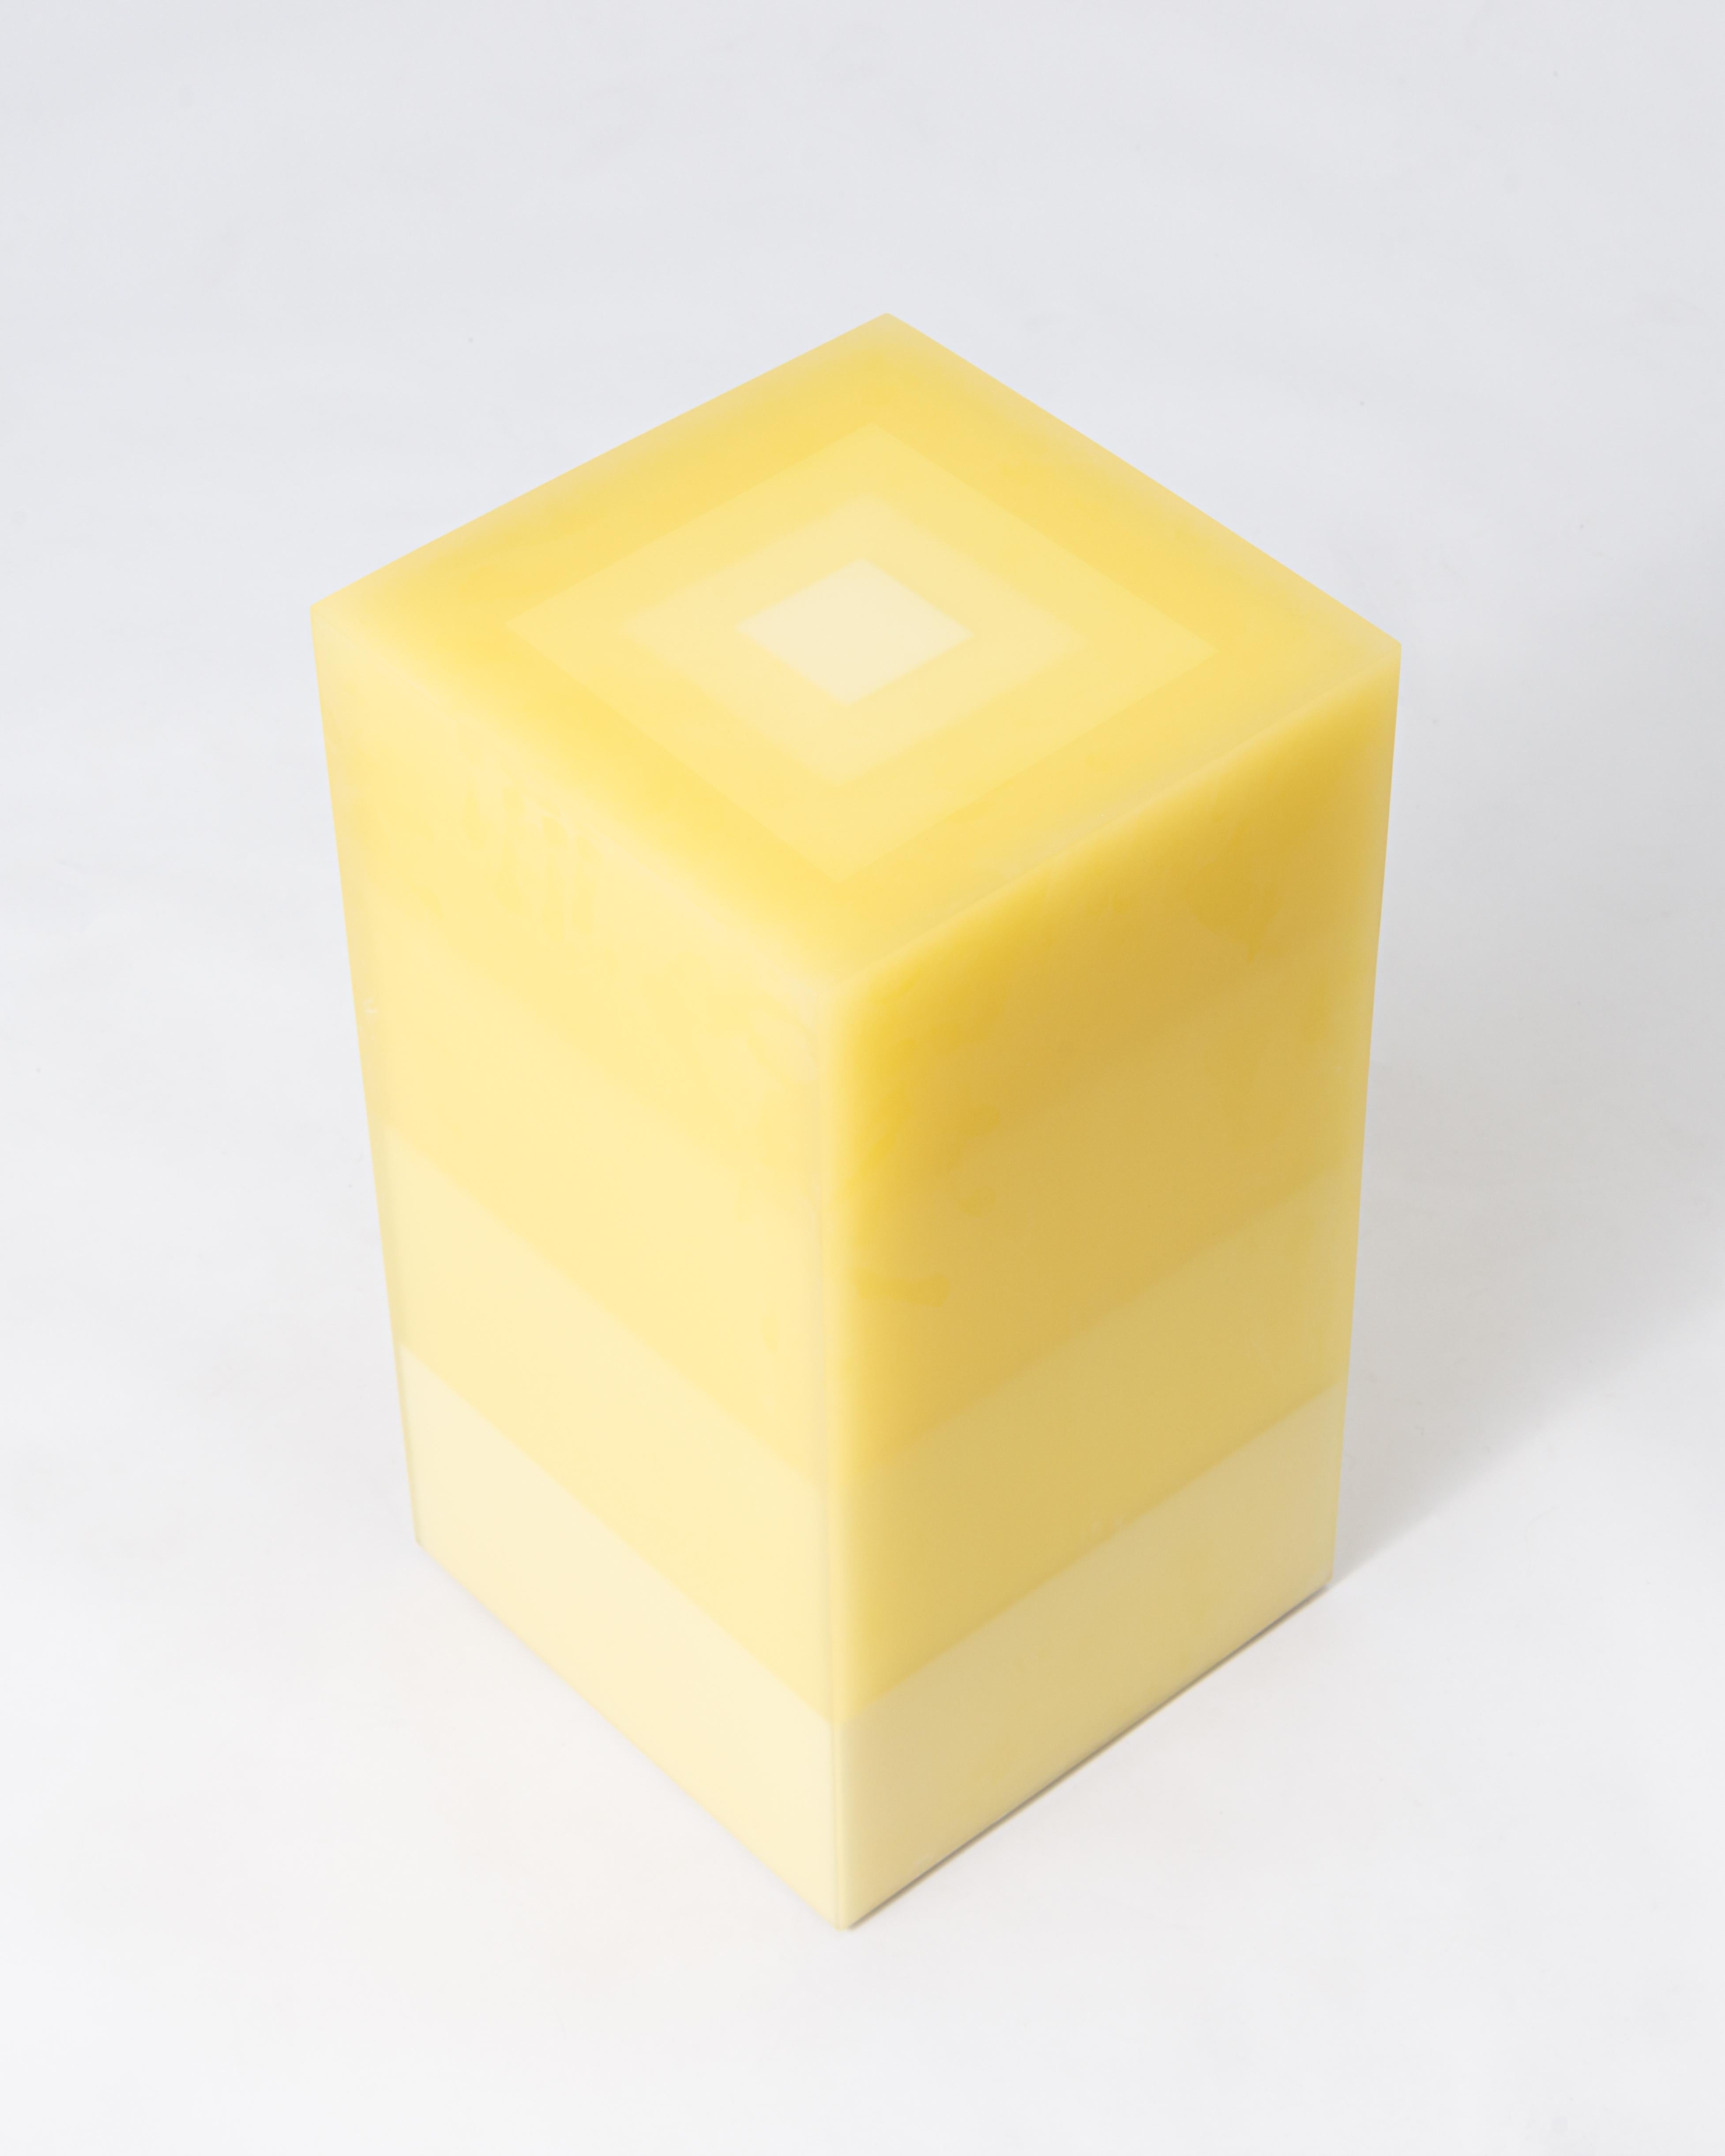 Modern Scale Pyramid Resin Side Table/Stool in Yellow by Facture REP by Tuleste Factory For Sale